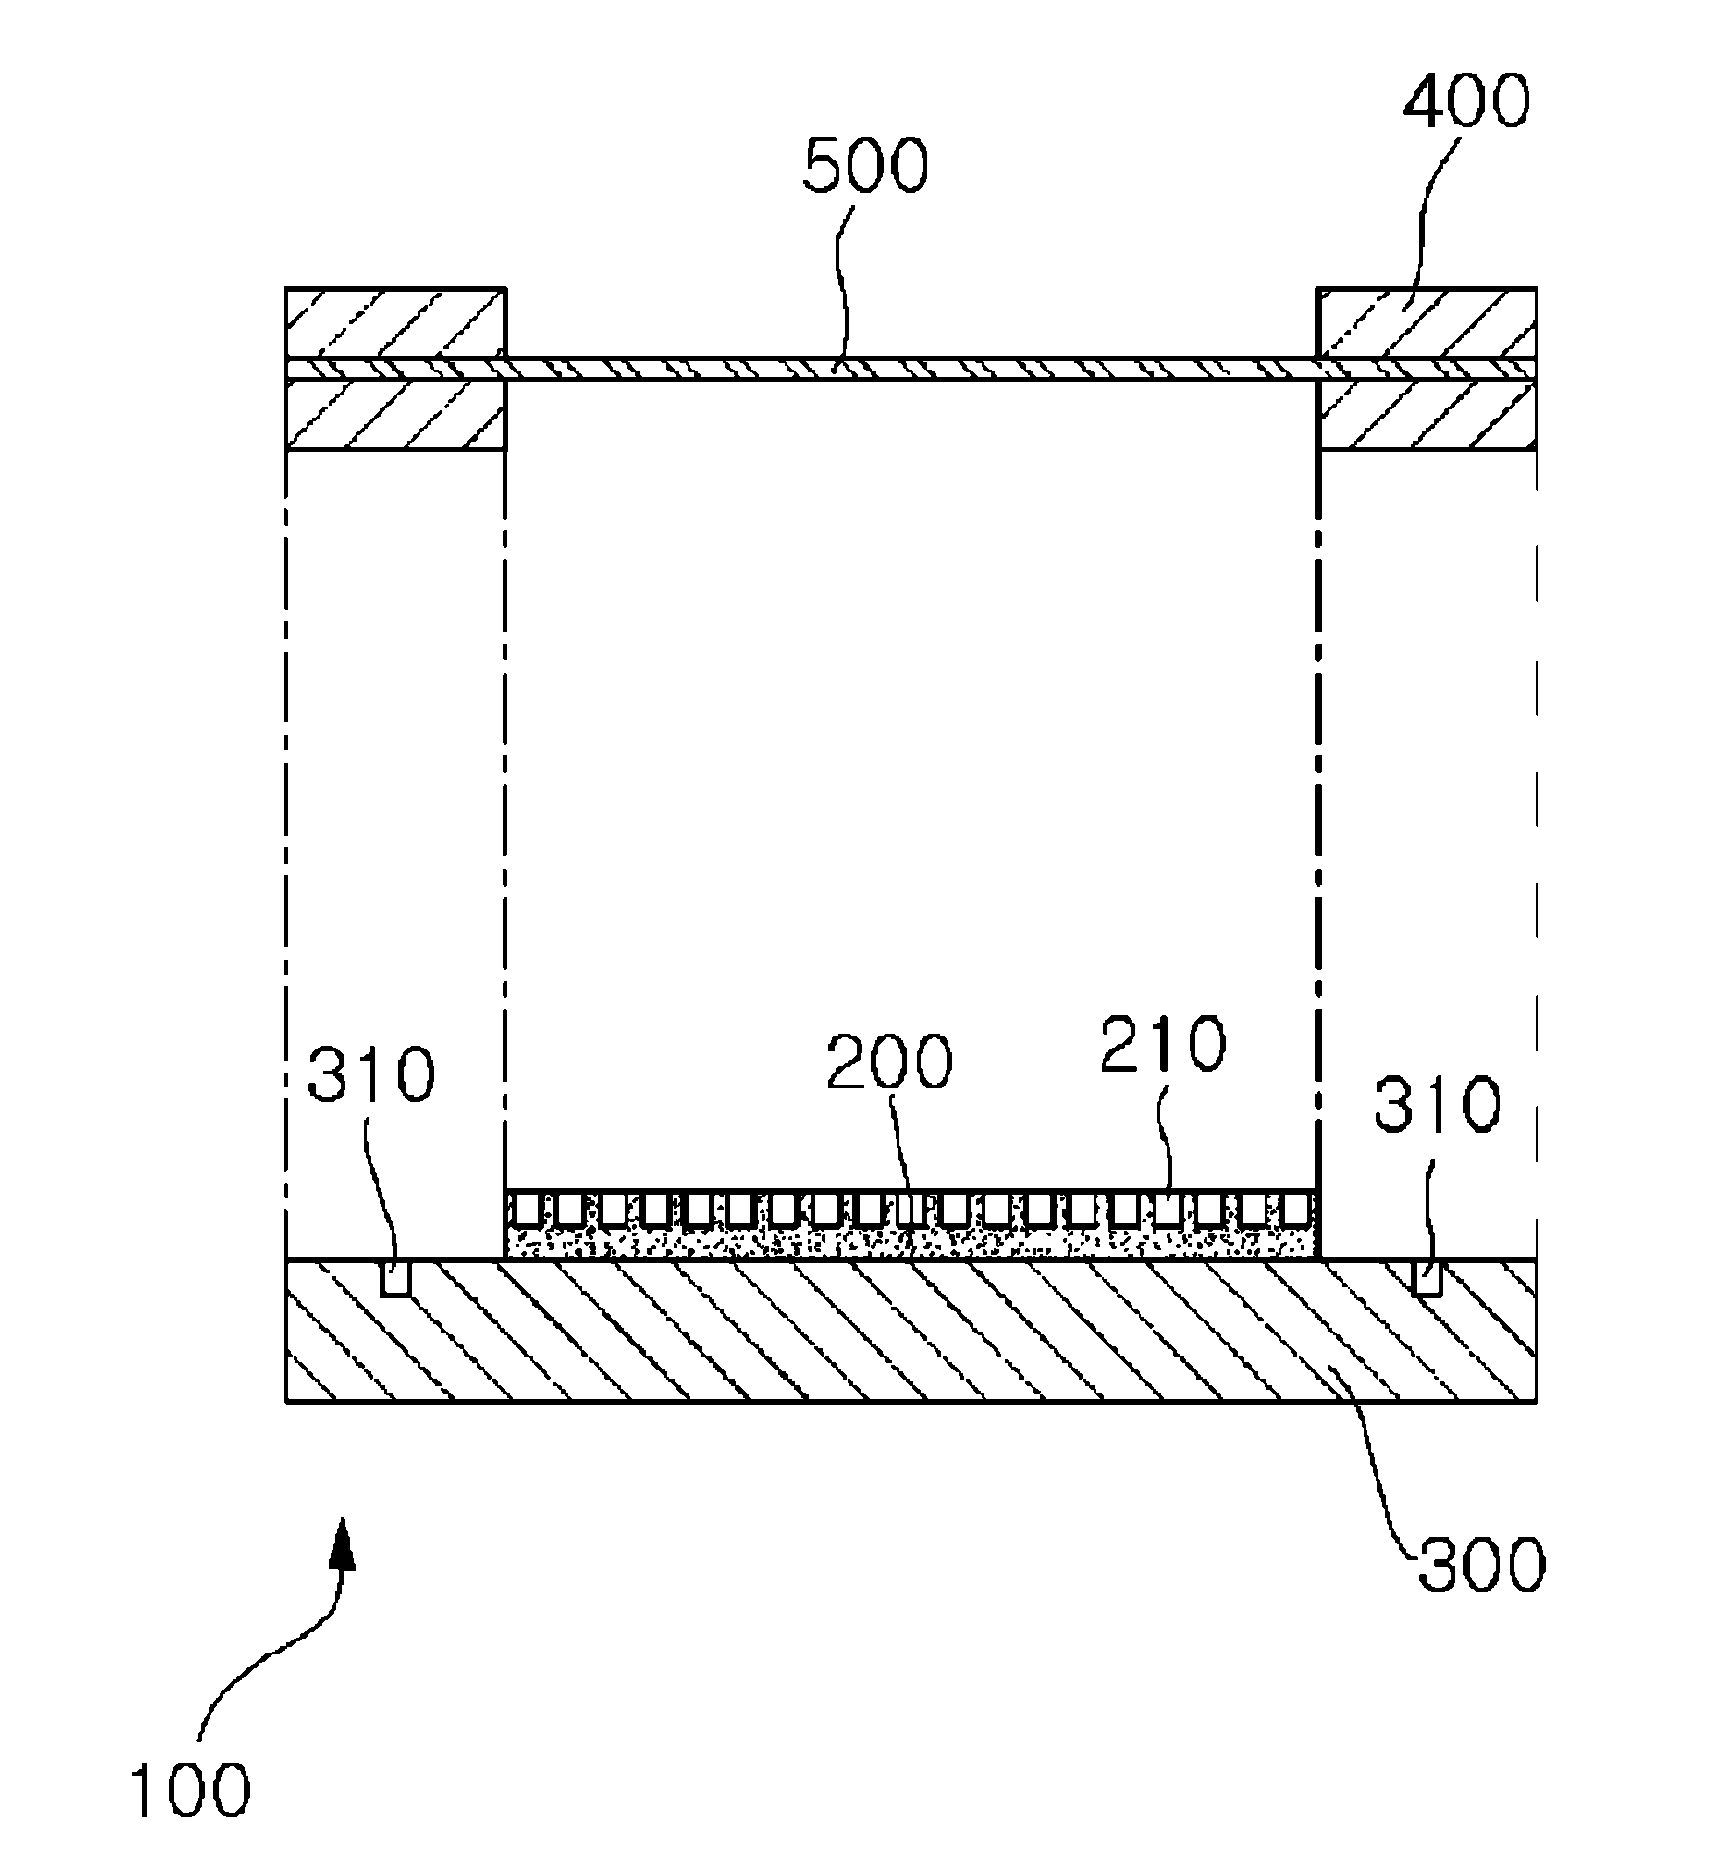 Apparatus for fixing plastic sheet and method of fabricating nano pattern on plastic sheet using the same